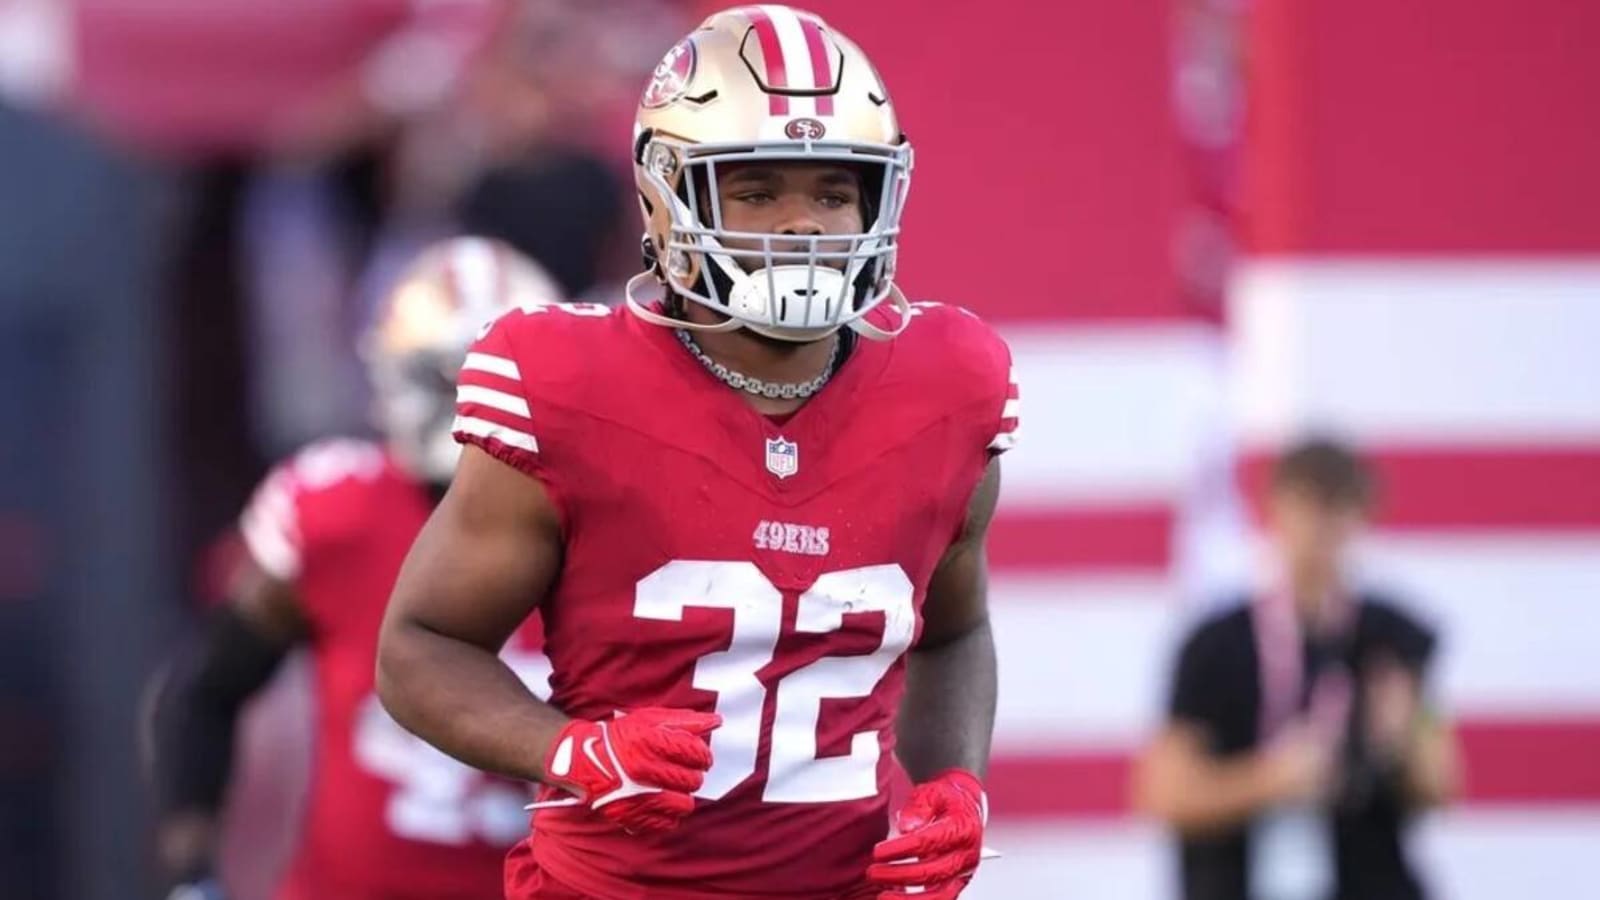 Eagles add running back depth, sign former 49ers third-round pick